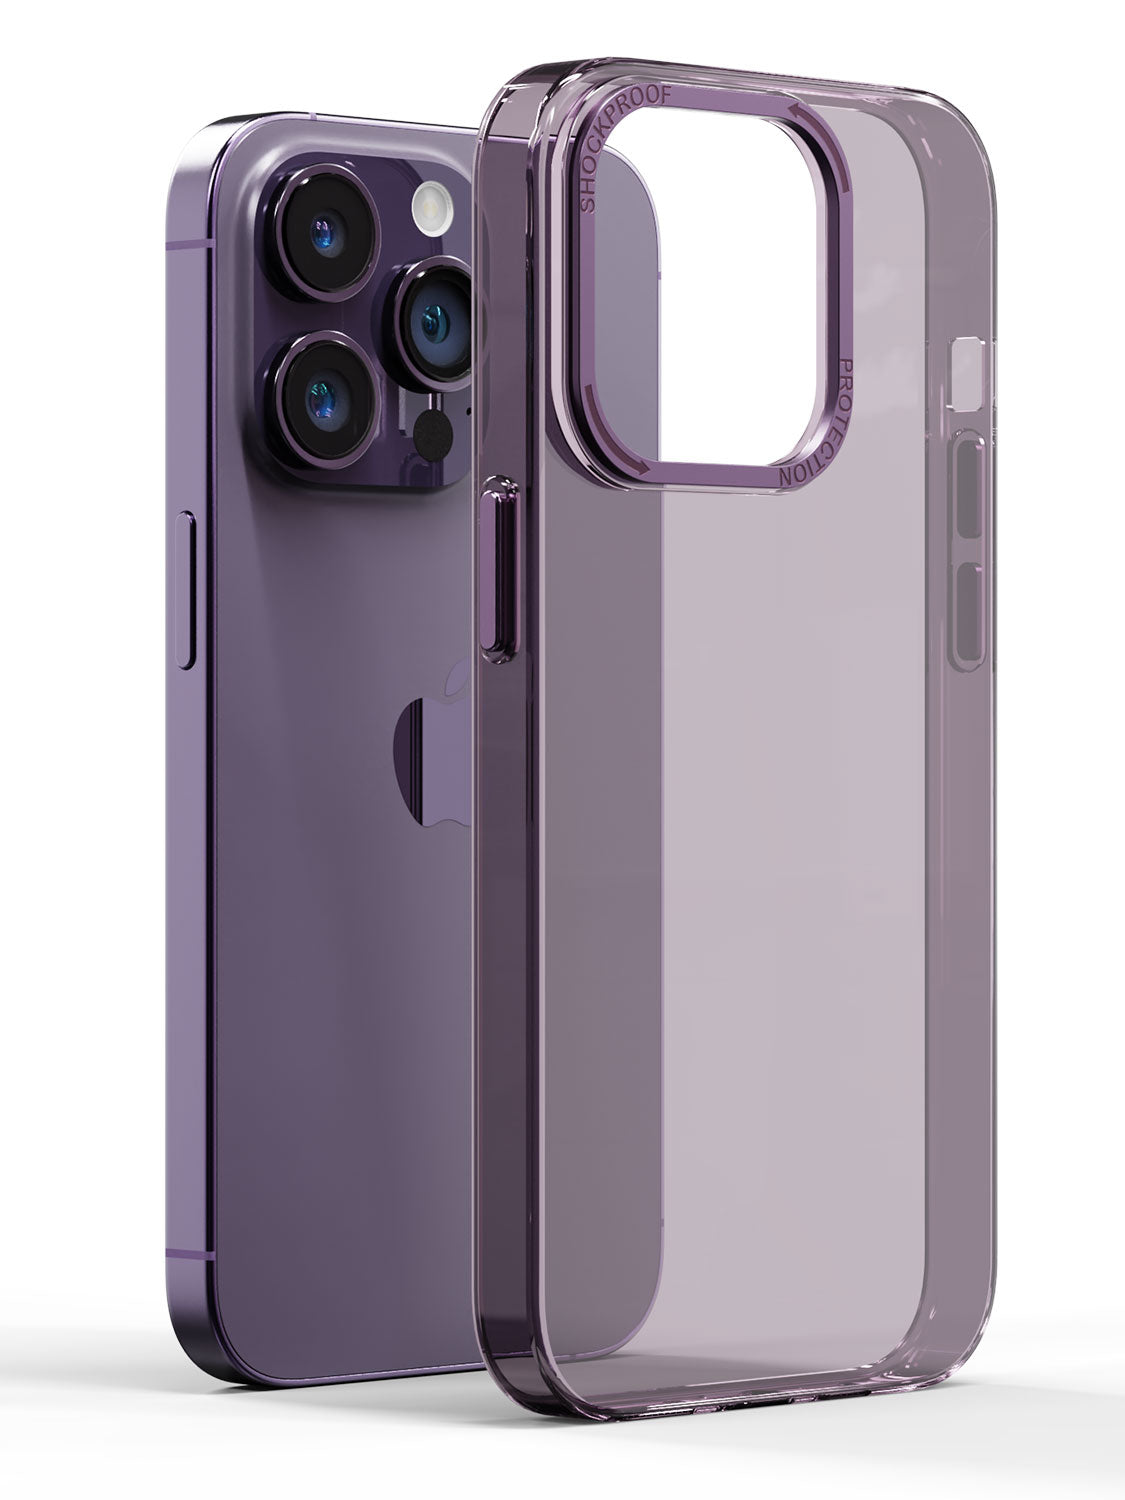 iphone 14 pro case with camera protection , iphone 14 pro cover with camera protection , iphone 14 pro case cover with camera protection , iphone 14 pro back cover with camera protection